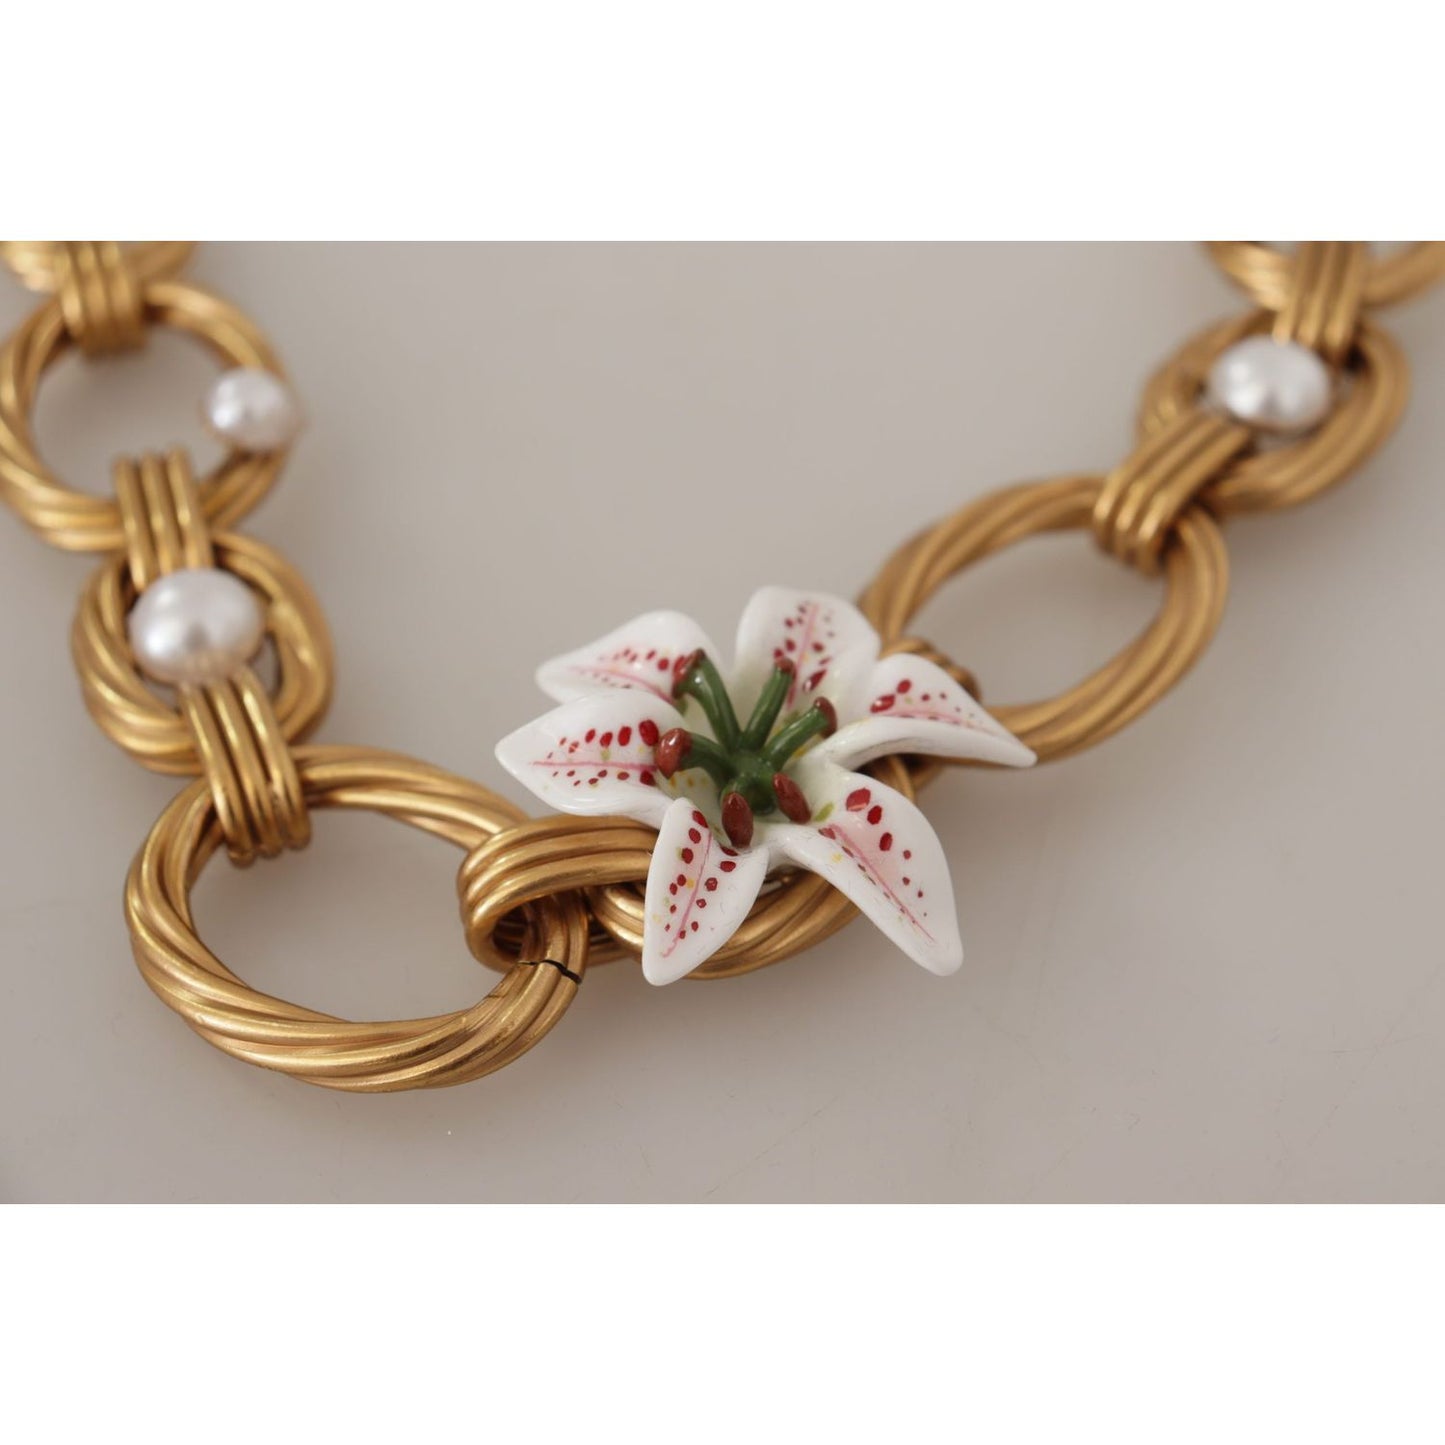 WOMAN NECKLACE Elegant Gold Lilly Flower Pendant Necklace Dolce & Gabbana